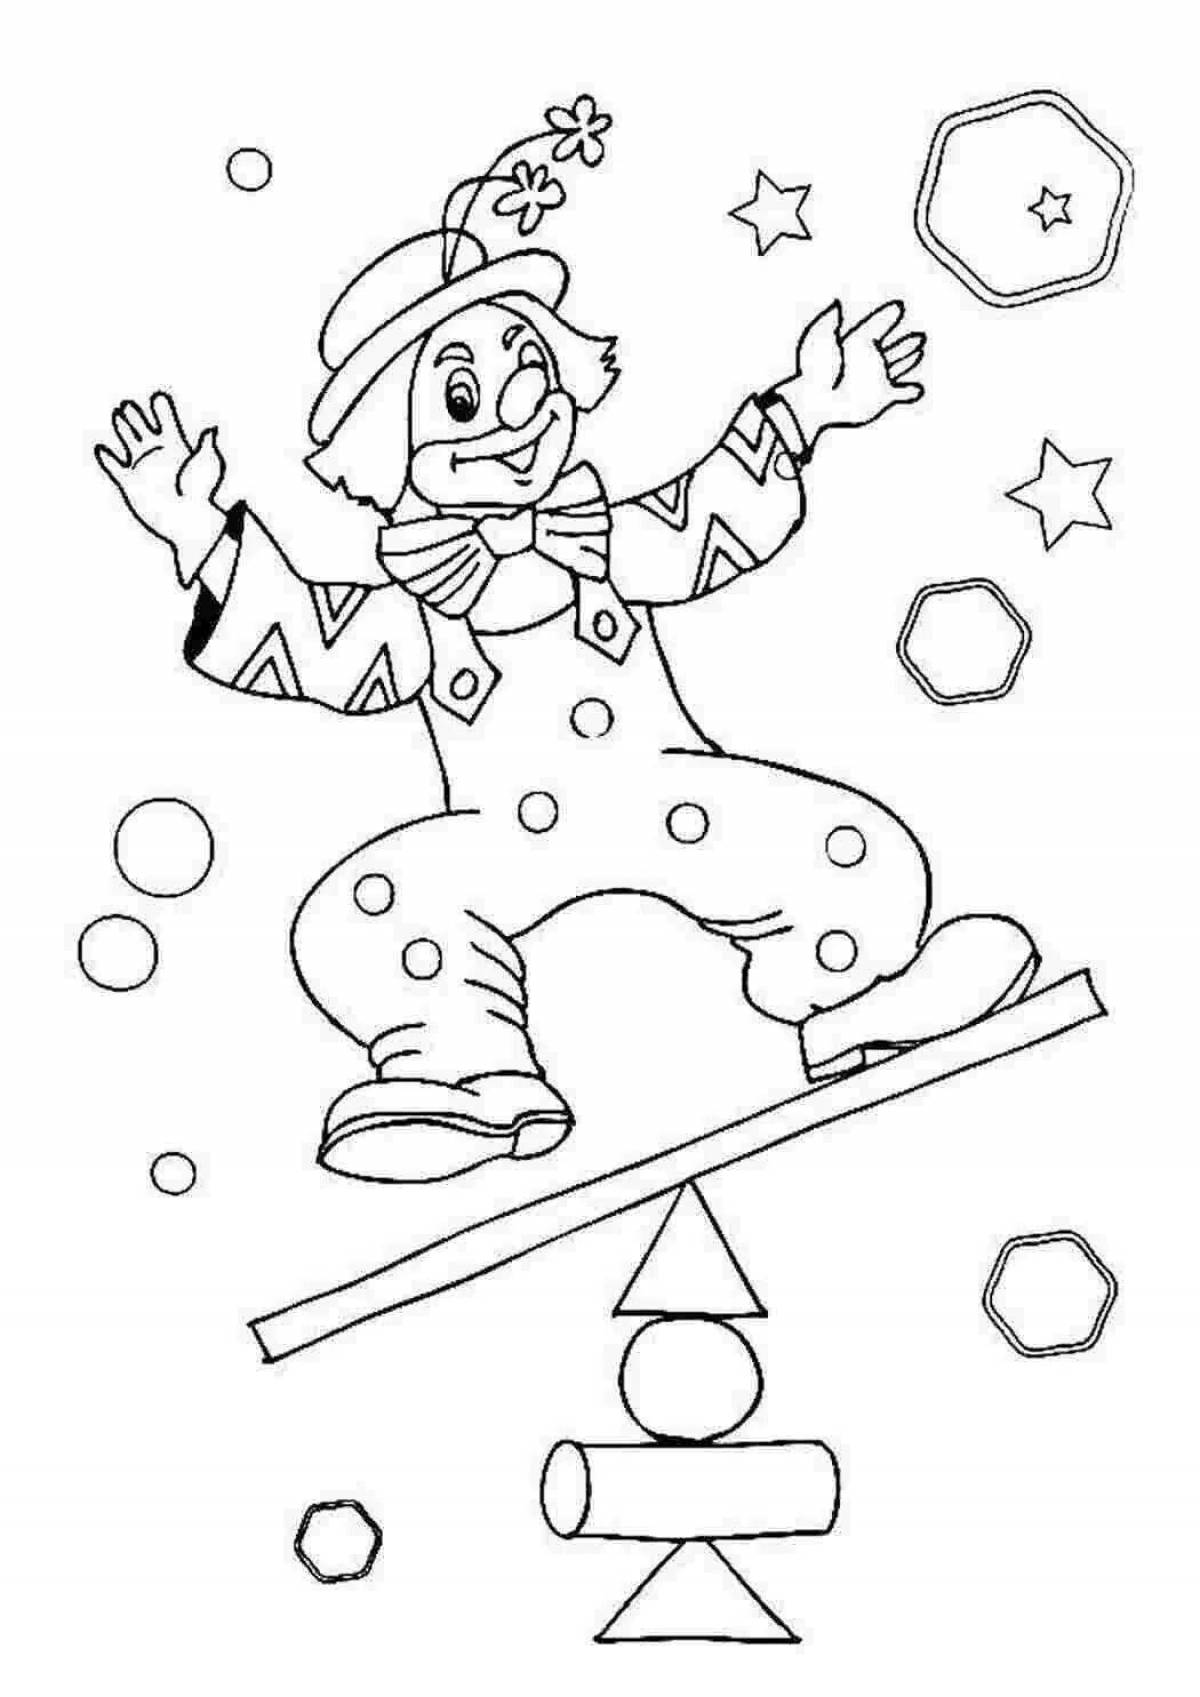 Amazing circus coloring book for kids 7-8 years old